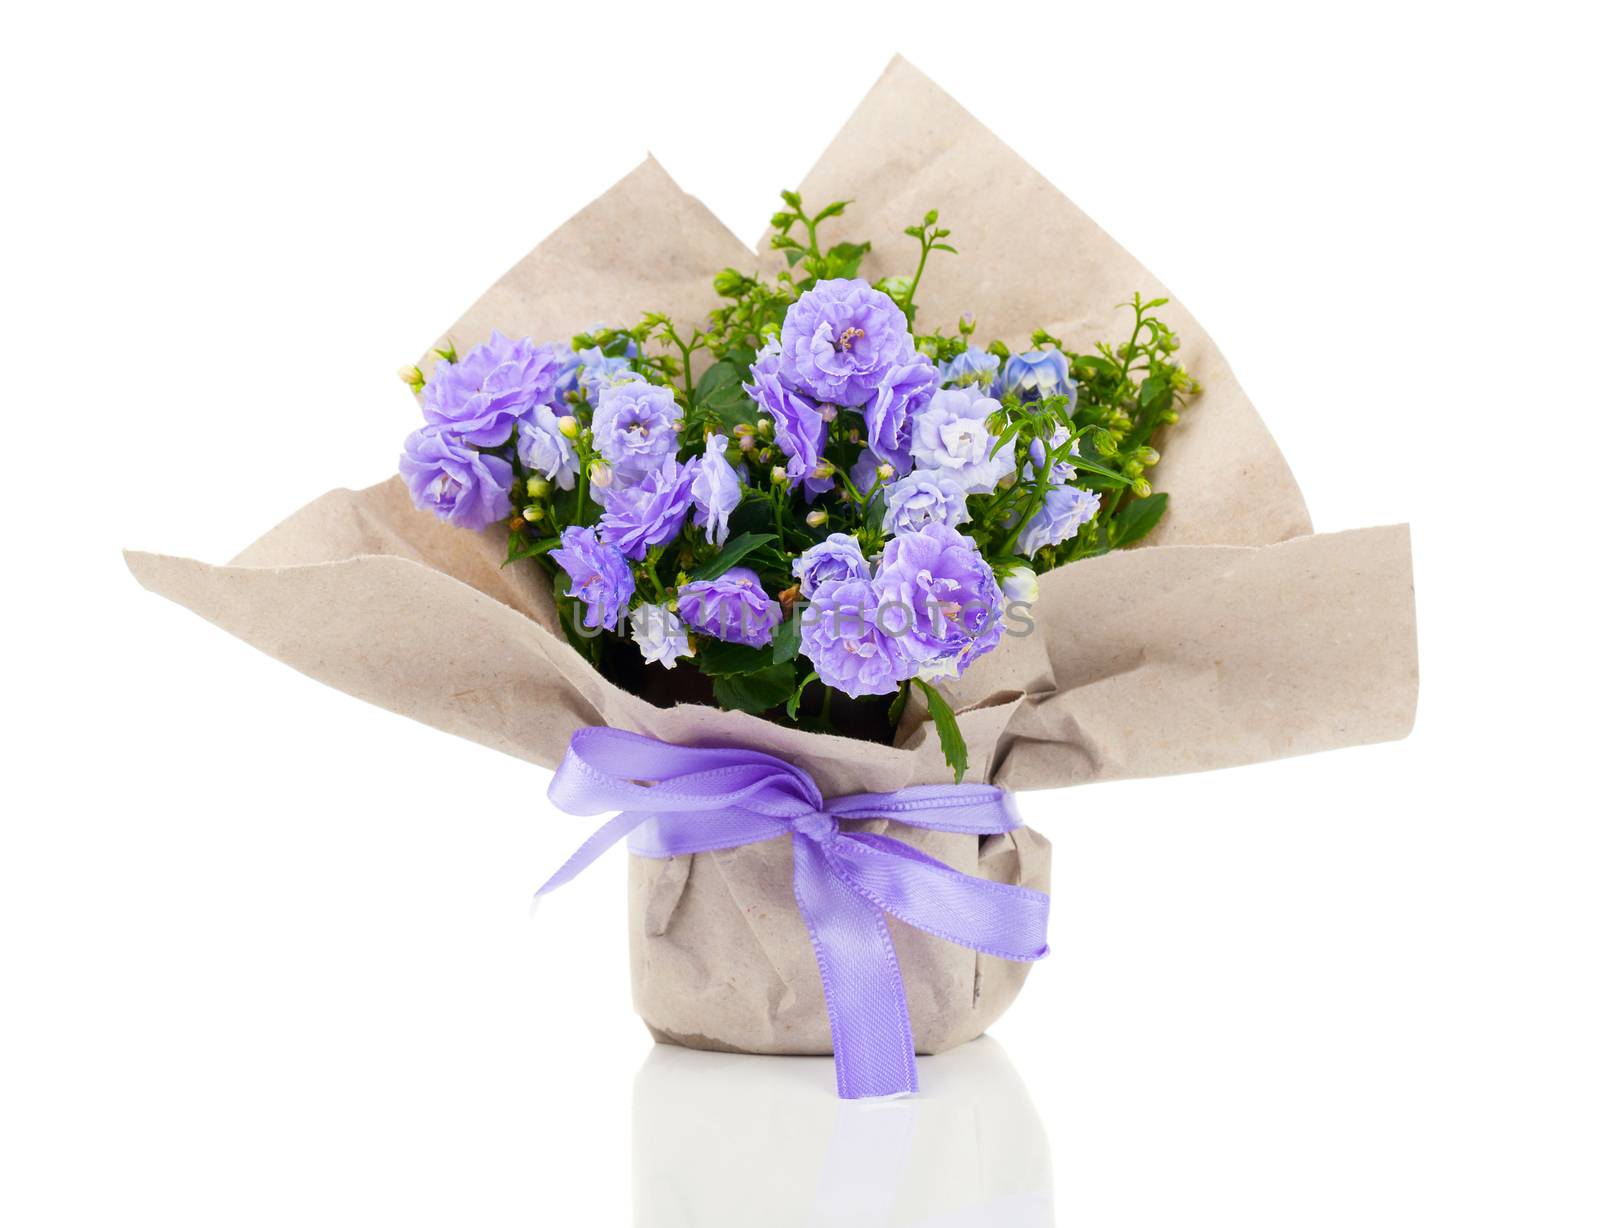 Campanula terry with blue flowers in paper packaging, isolated on white background